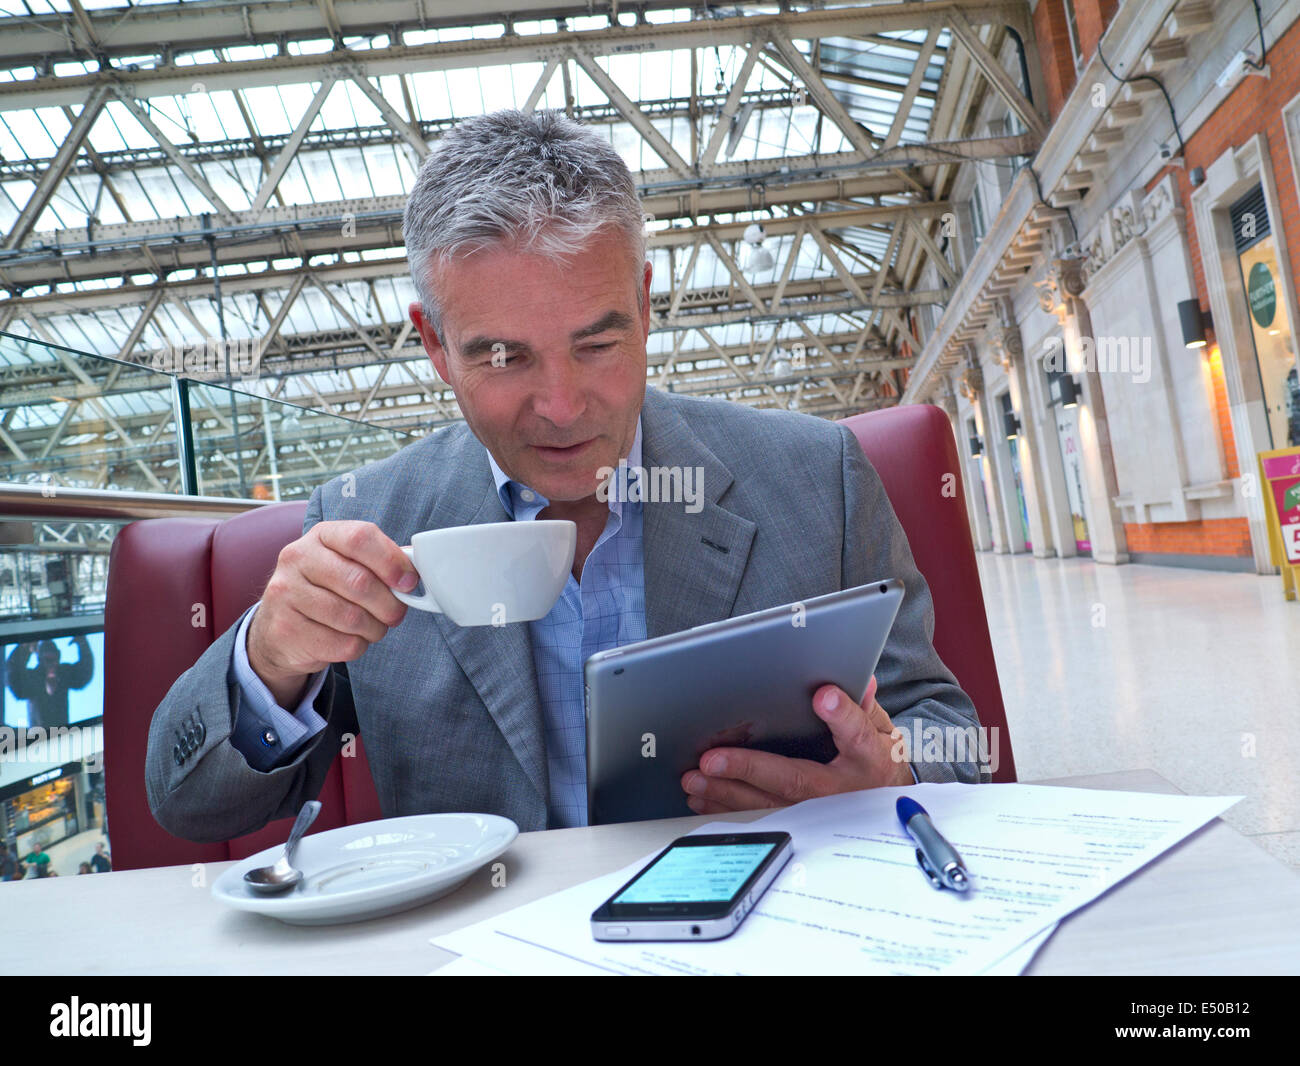 Mature businessman seated at cafe table on railway concourse looking at his tablet computer with iPhone and notes in foreground Stock Photo